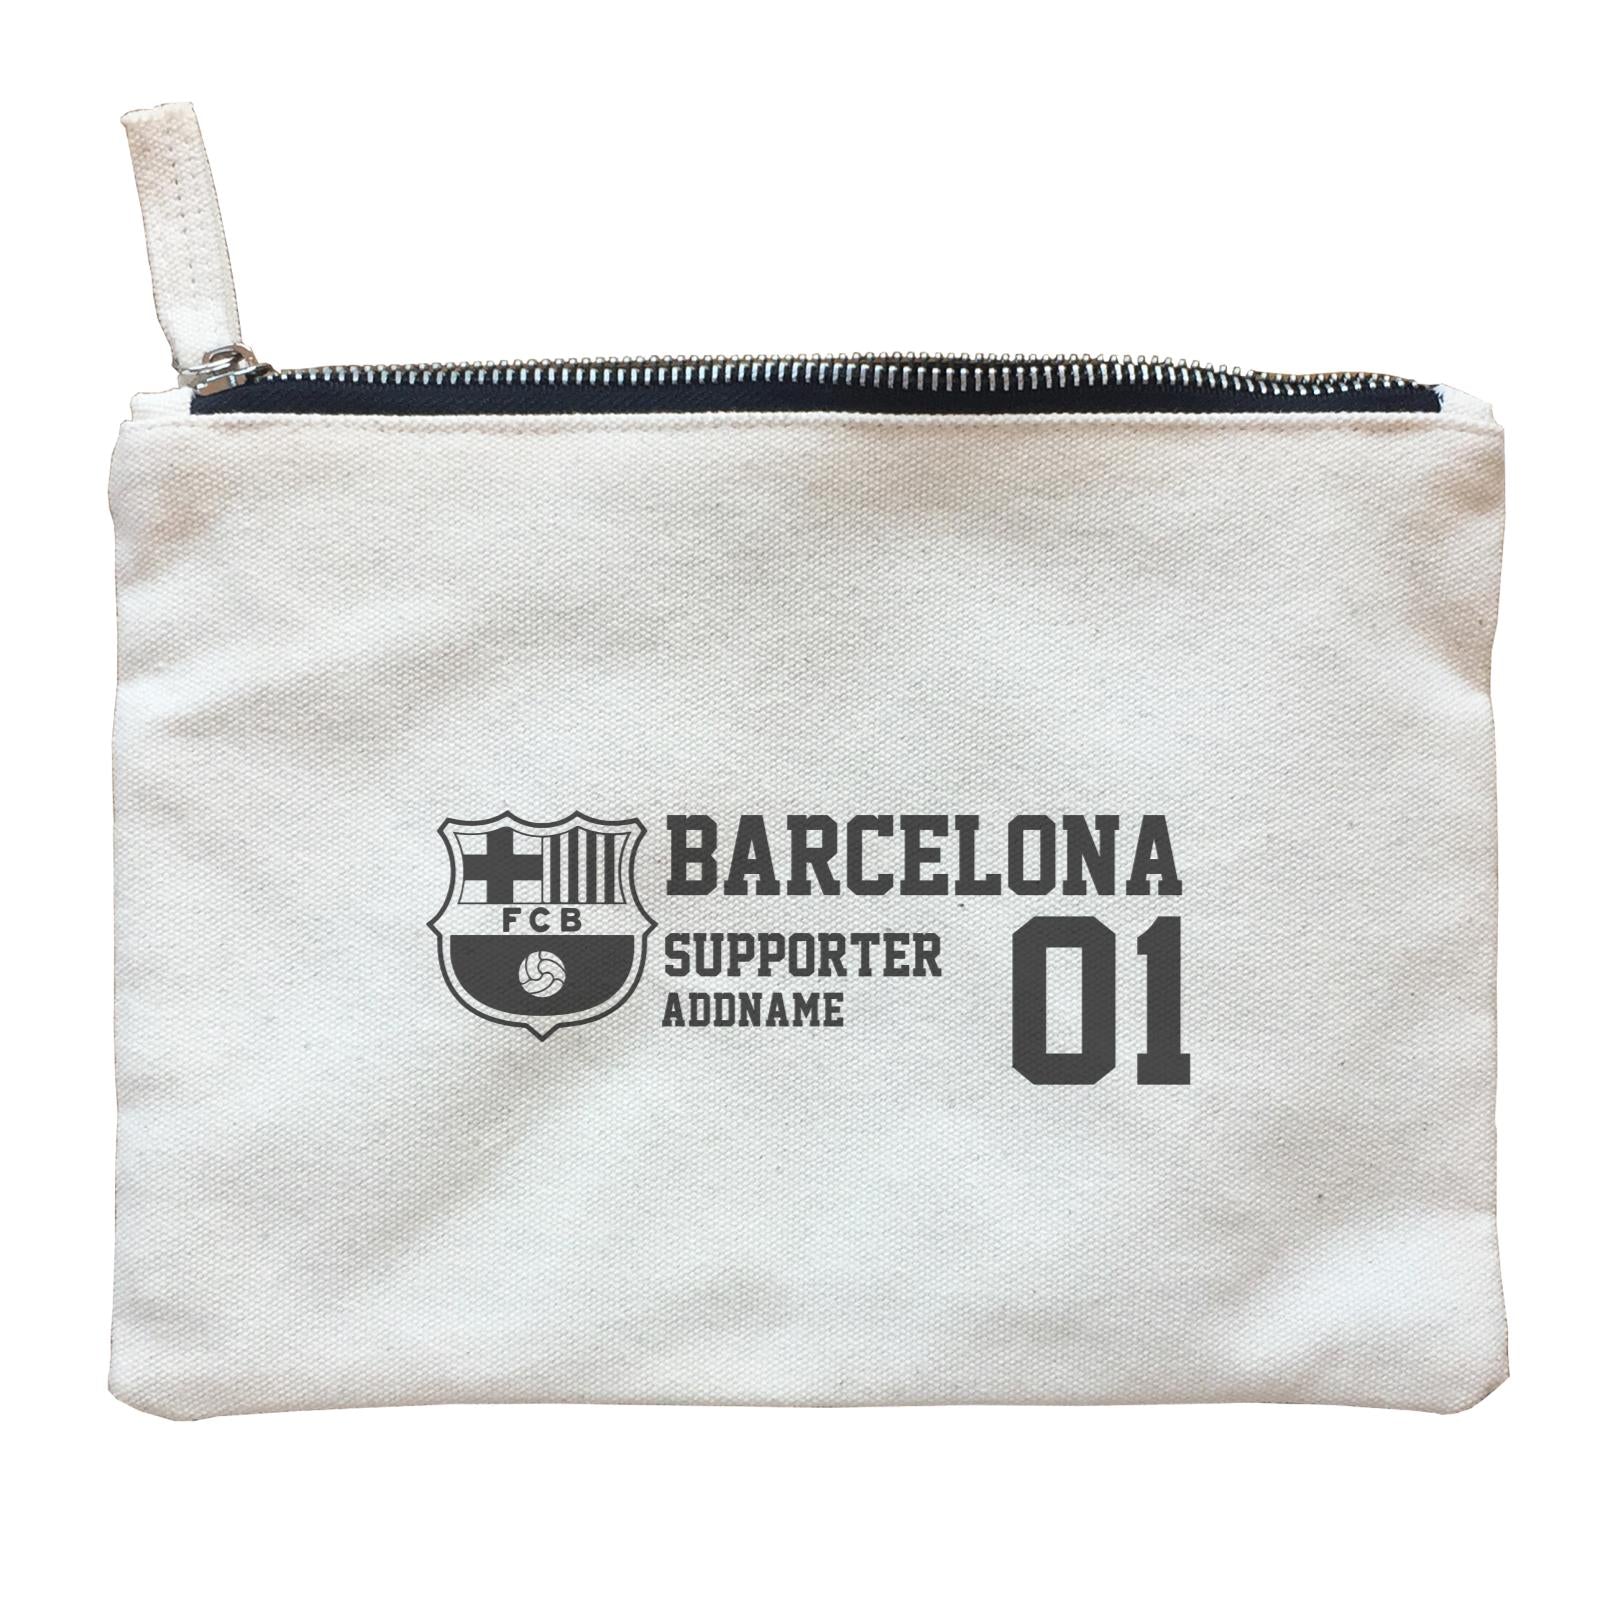 Barcelona Football Logo Supporter Accessories Addname Zipper Pouch